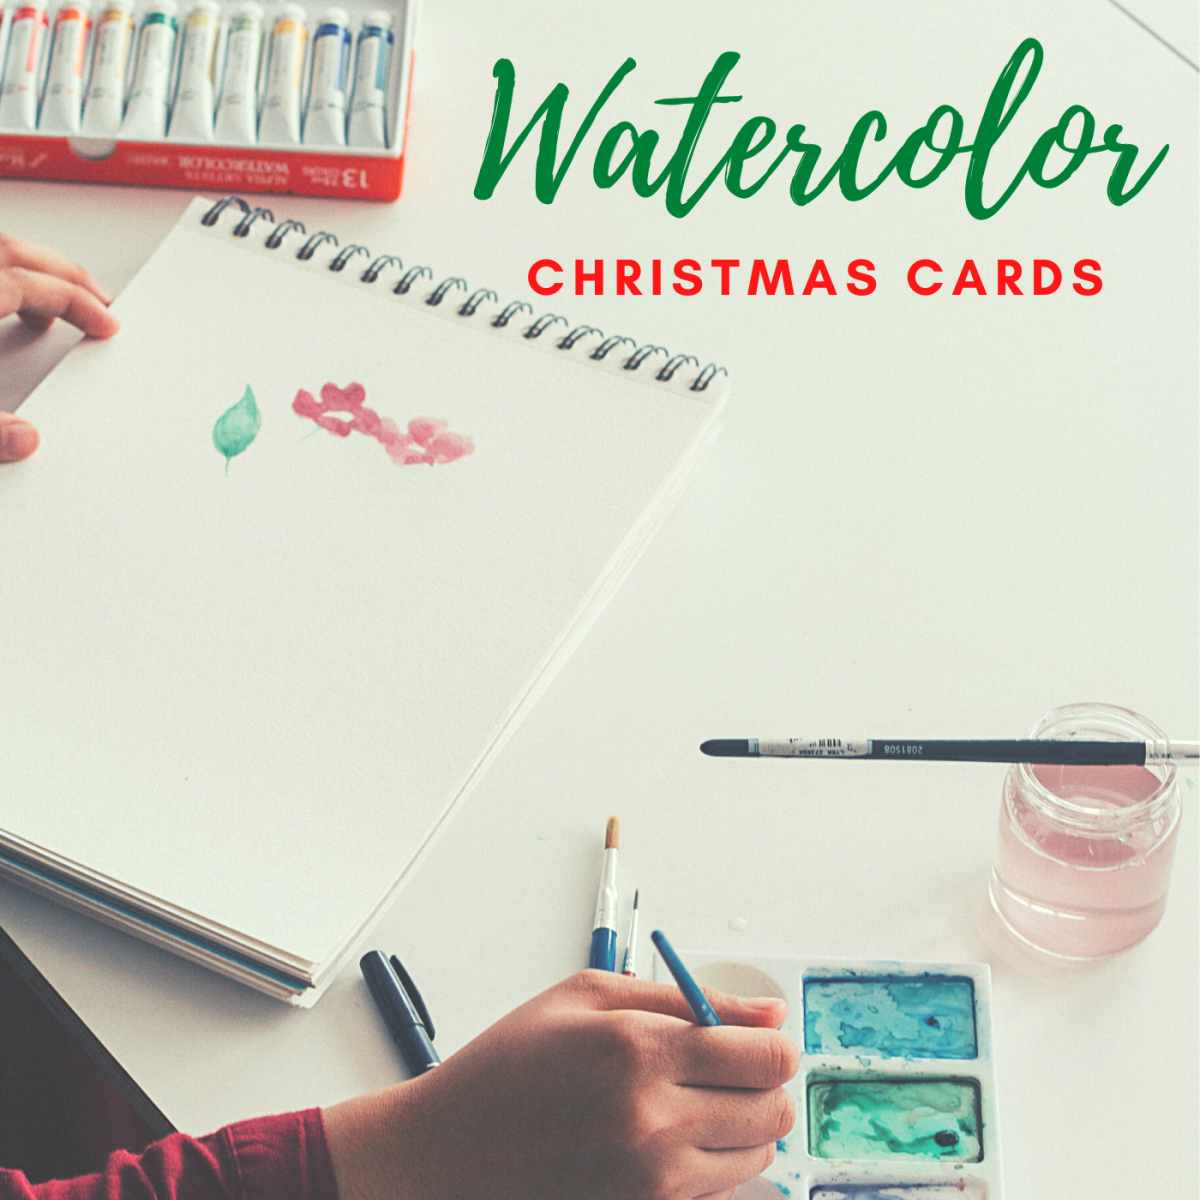 How to Make Beautiful, Personalized, Watercolor Christmas Cards